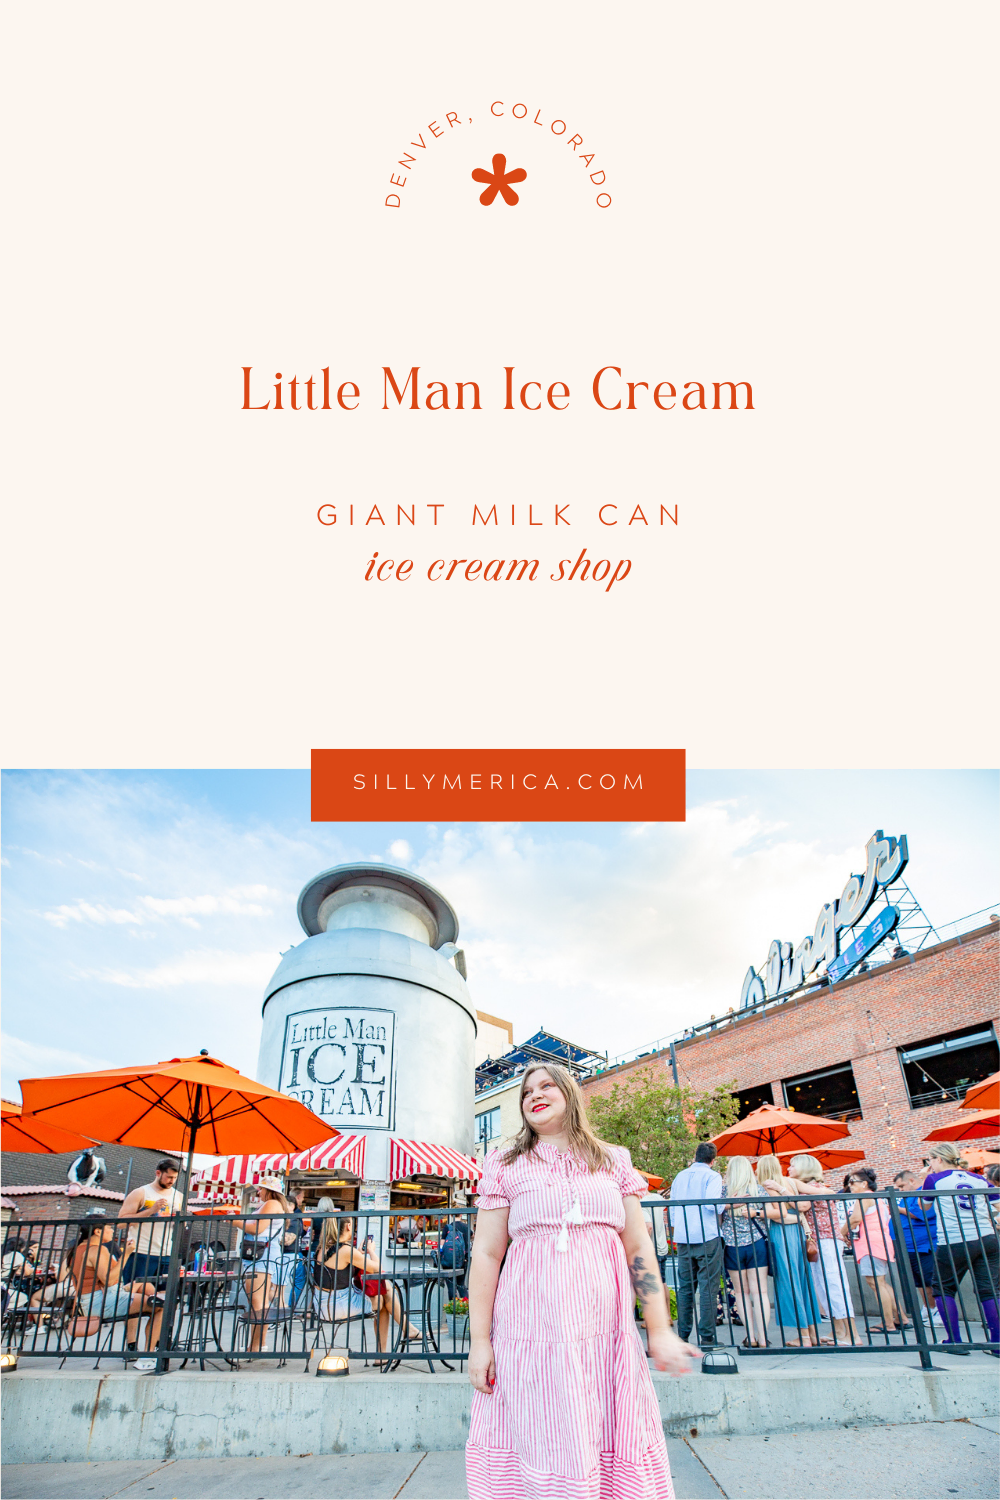 Get the scoop on this Colorado roadside attraction. Little Man Ice Cream in Denver, Colorado serves delicious treats inside of a giant milk can shaped building. It's a sweet stop you can't miss! Located in the Lower Highland neighborhood of Denver (LoHi), the retro ice cream stand is 28-feet tall, 14,000 pounds, and modeled after a 1928-vintage style cream can. #RoadTrip #RoadsideAttraction #RoadsideAttractions #RoadTrips #Denver #Colorado #DenverColorado #IceCream